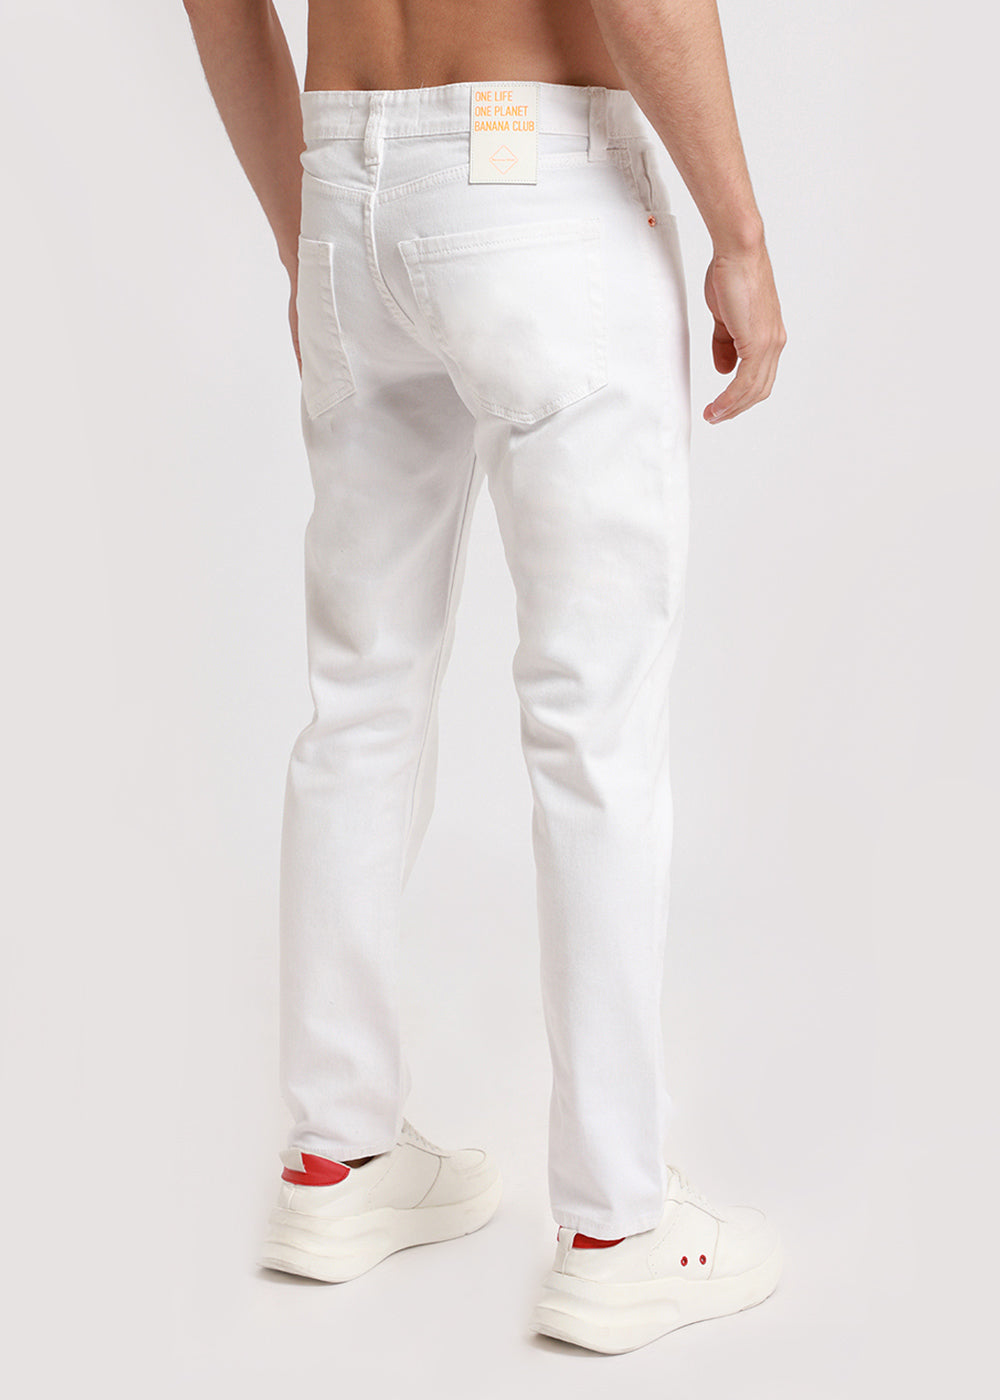 Ribbed White Slim fit Jeans